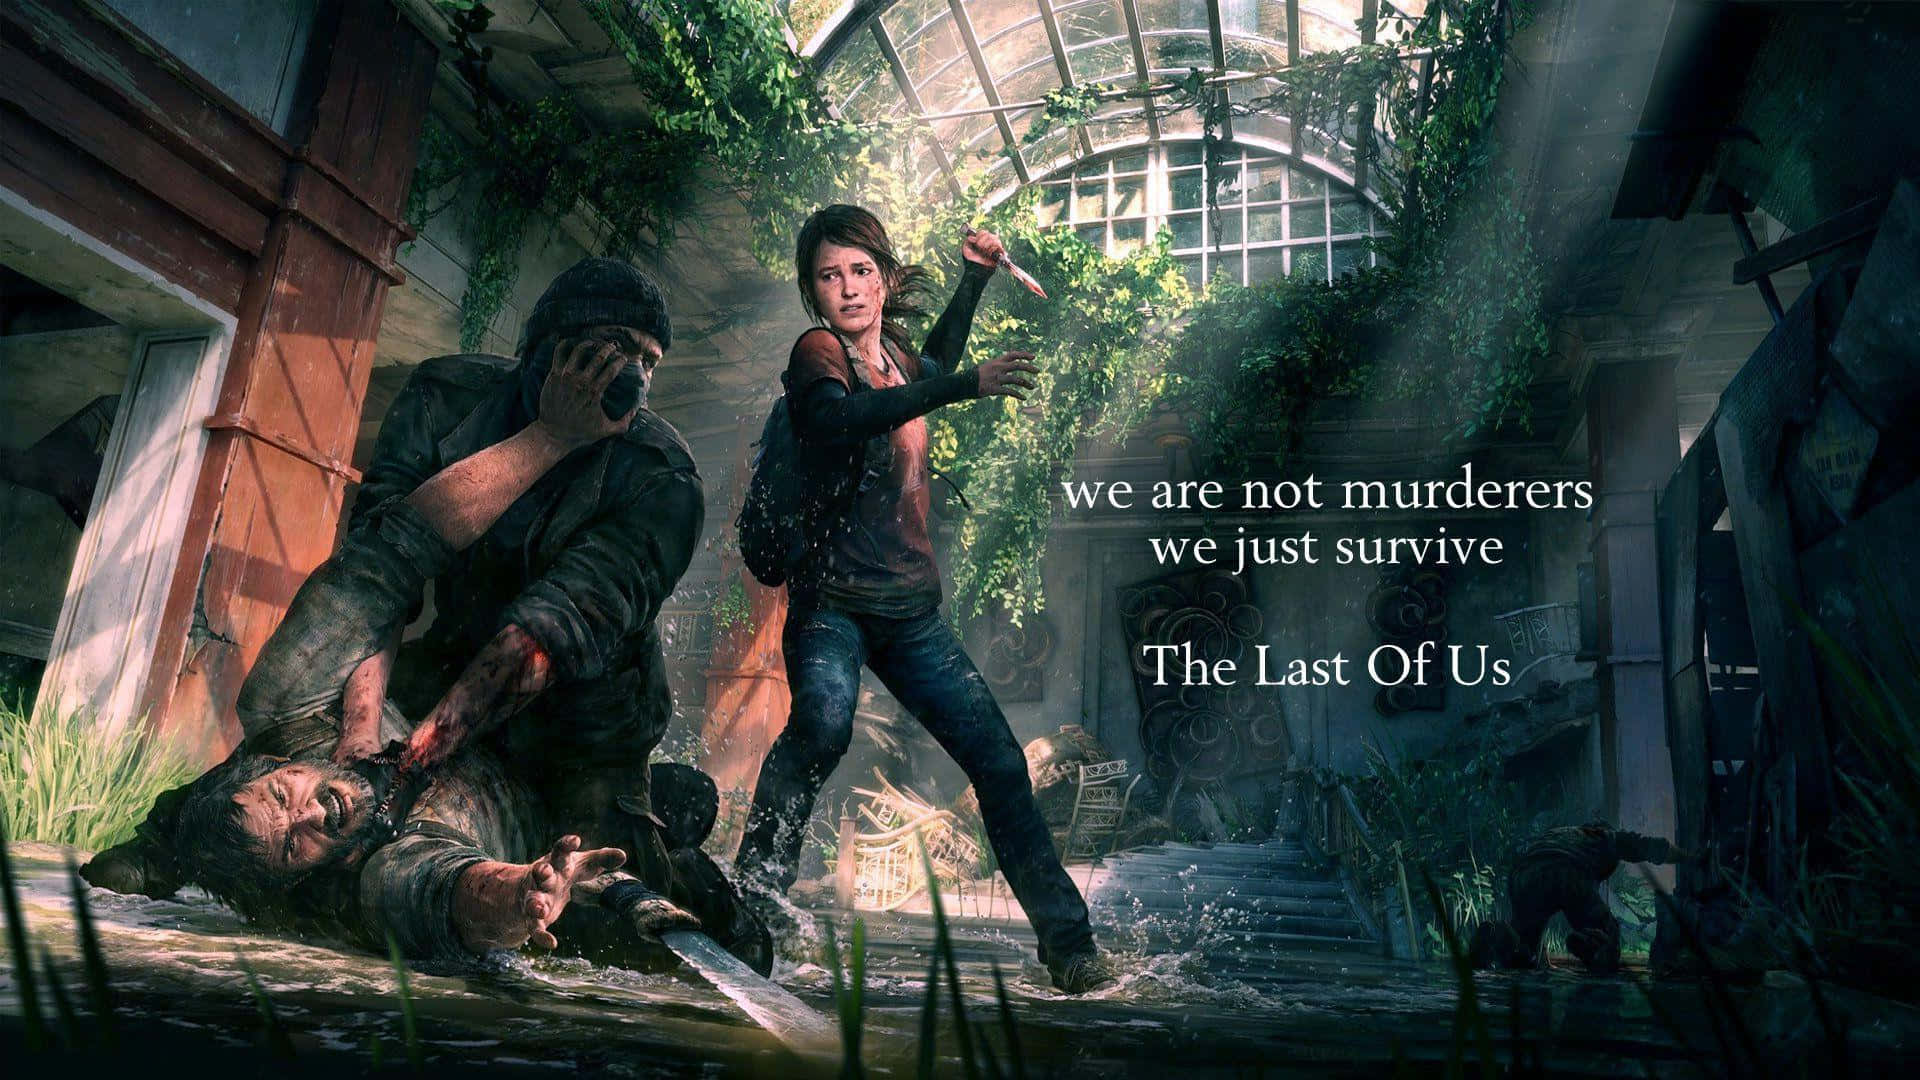 Ellie and Joel navigating through a post-apocalyptic world in The Last of Us.